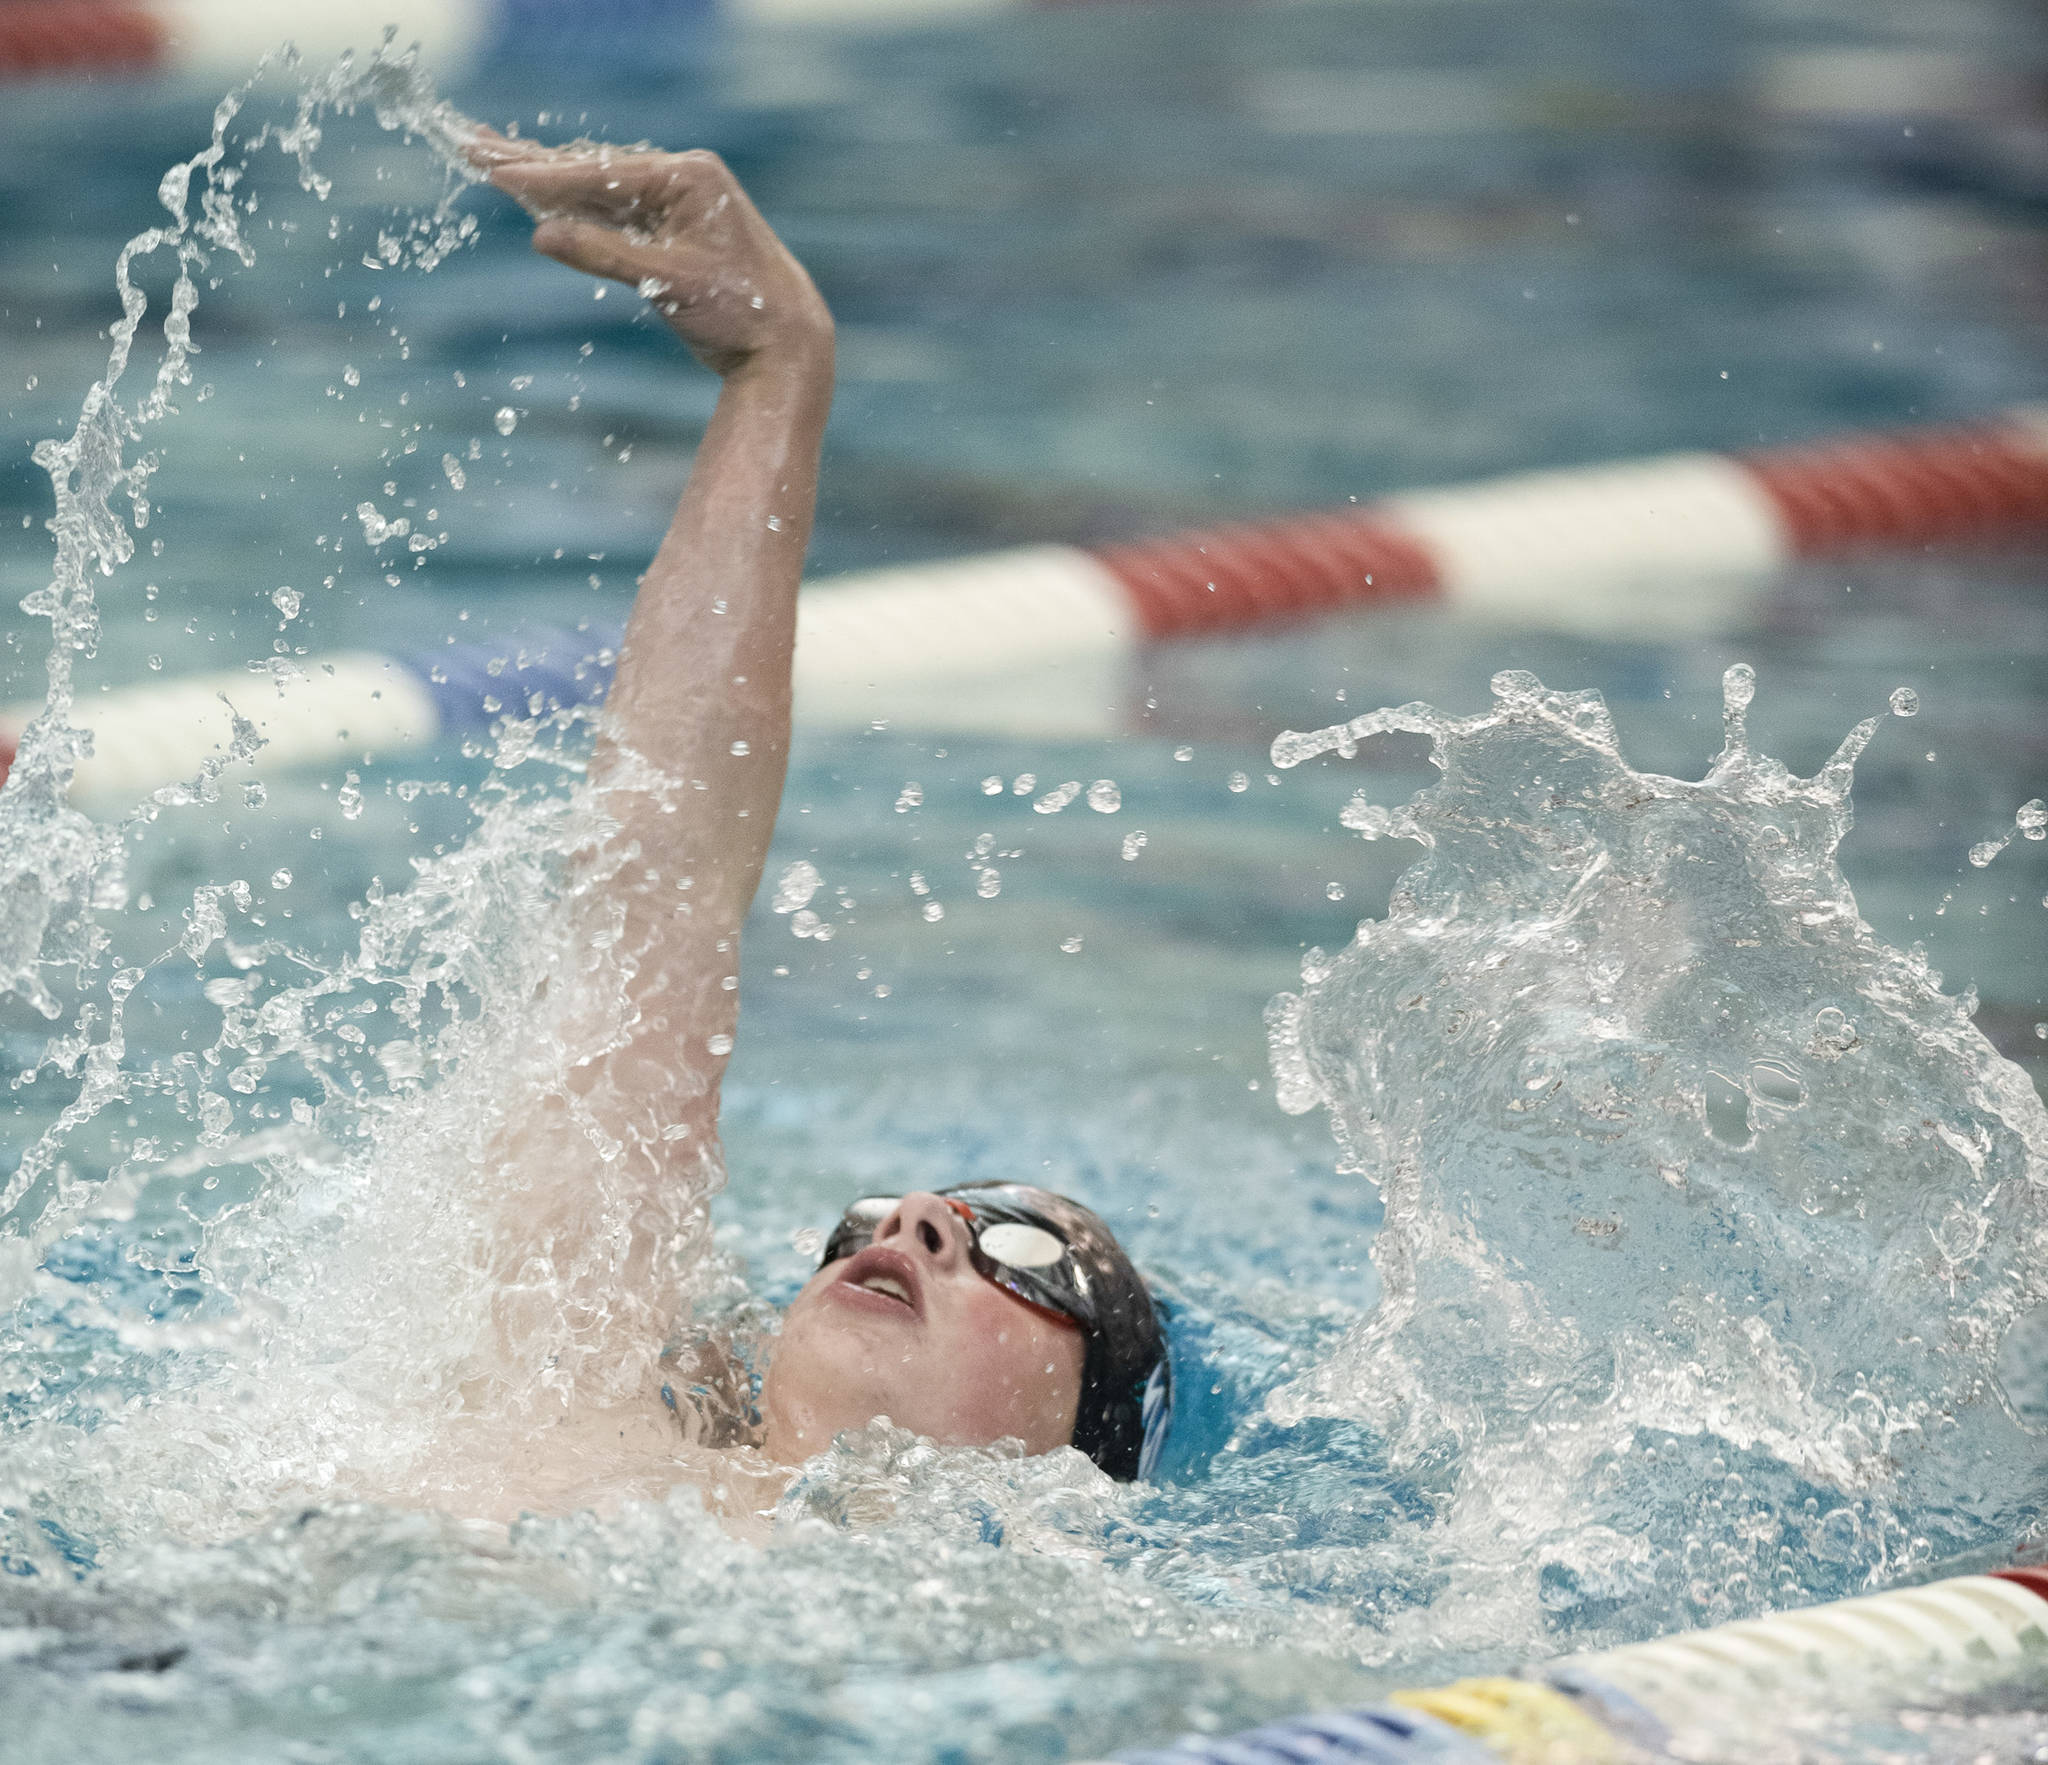 Thunder Mountain’s Sven Rasmussen competes in the 200 Yard IM at the Juneau Invitational Swim Meet at the Dimond Park Aquatic Center on Friday, Sept. 20, 2019. (Michael Penn | Juneau Empire)